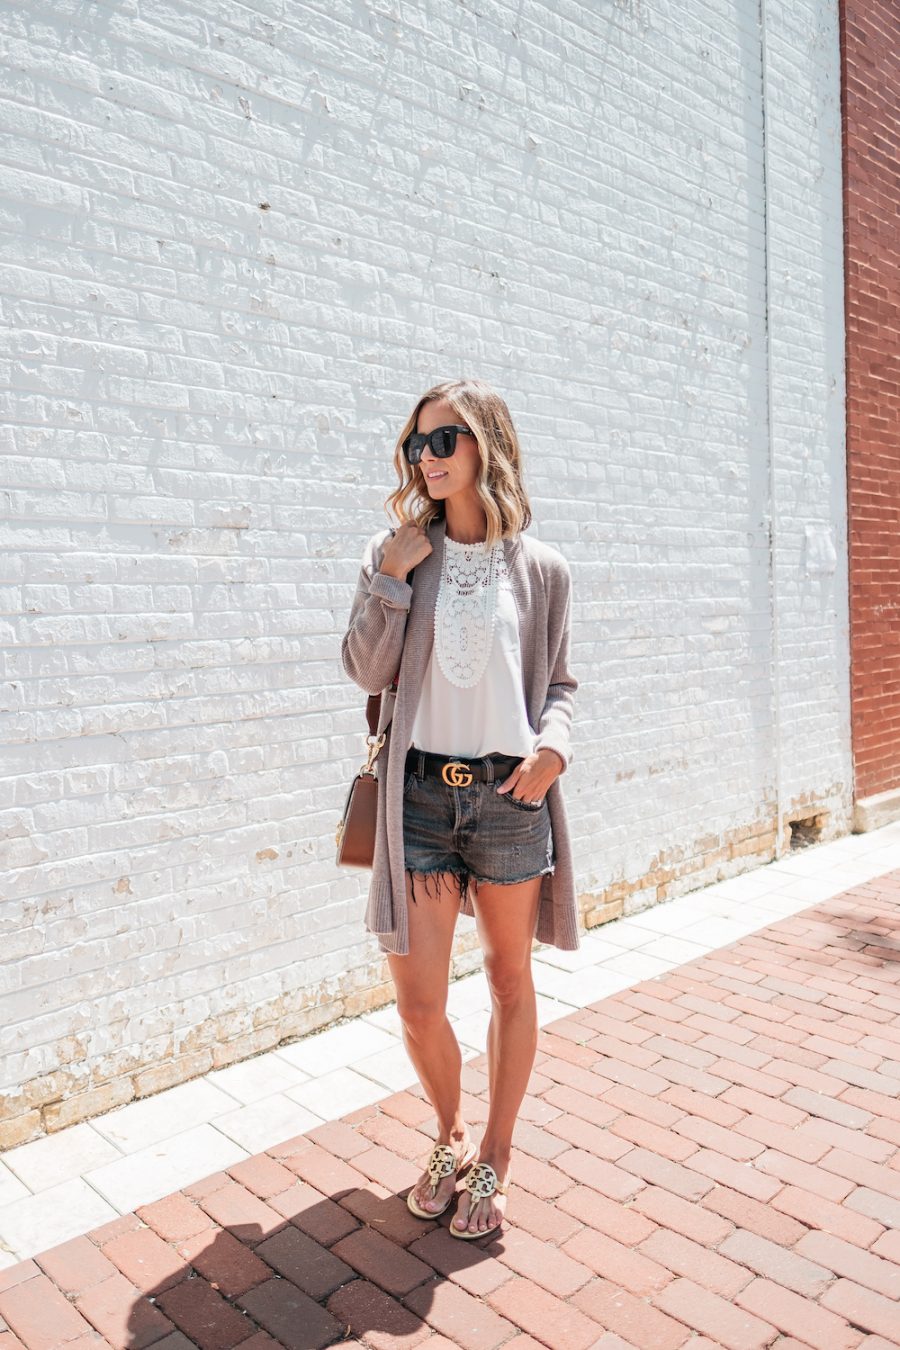 Suzanne wearing a white lace blouse, cardigan, denim shorts, and sandals